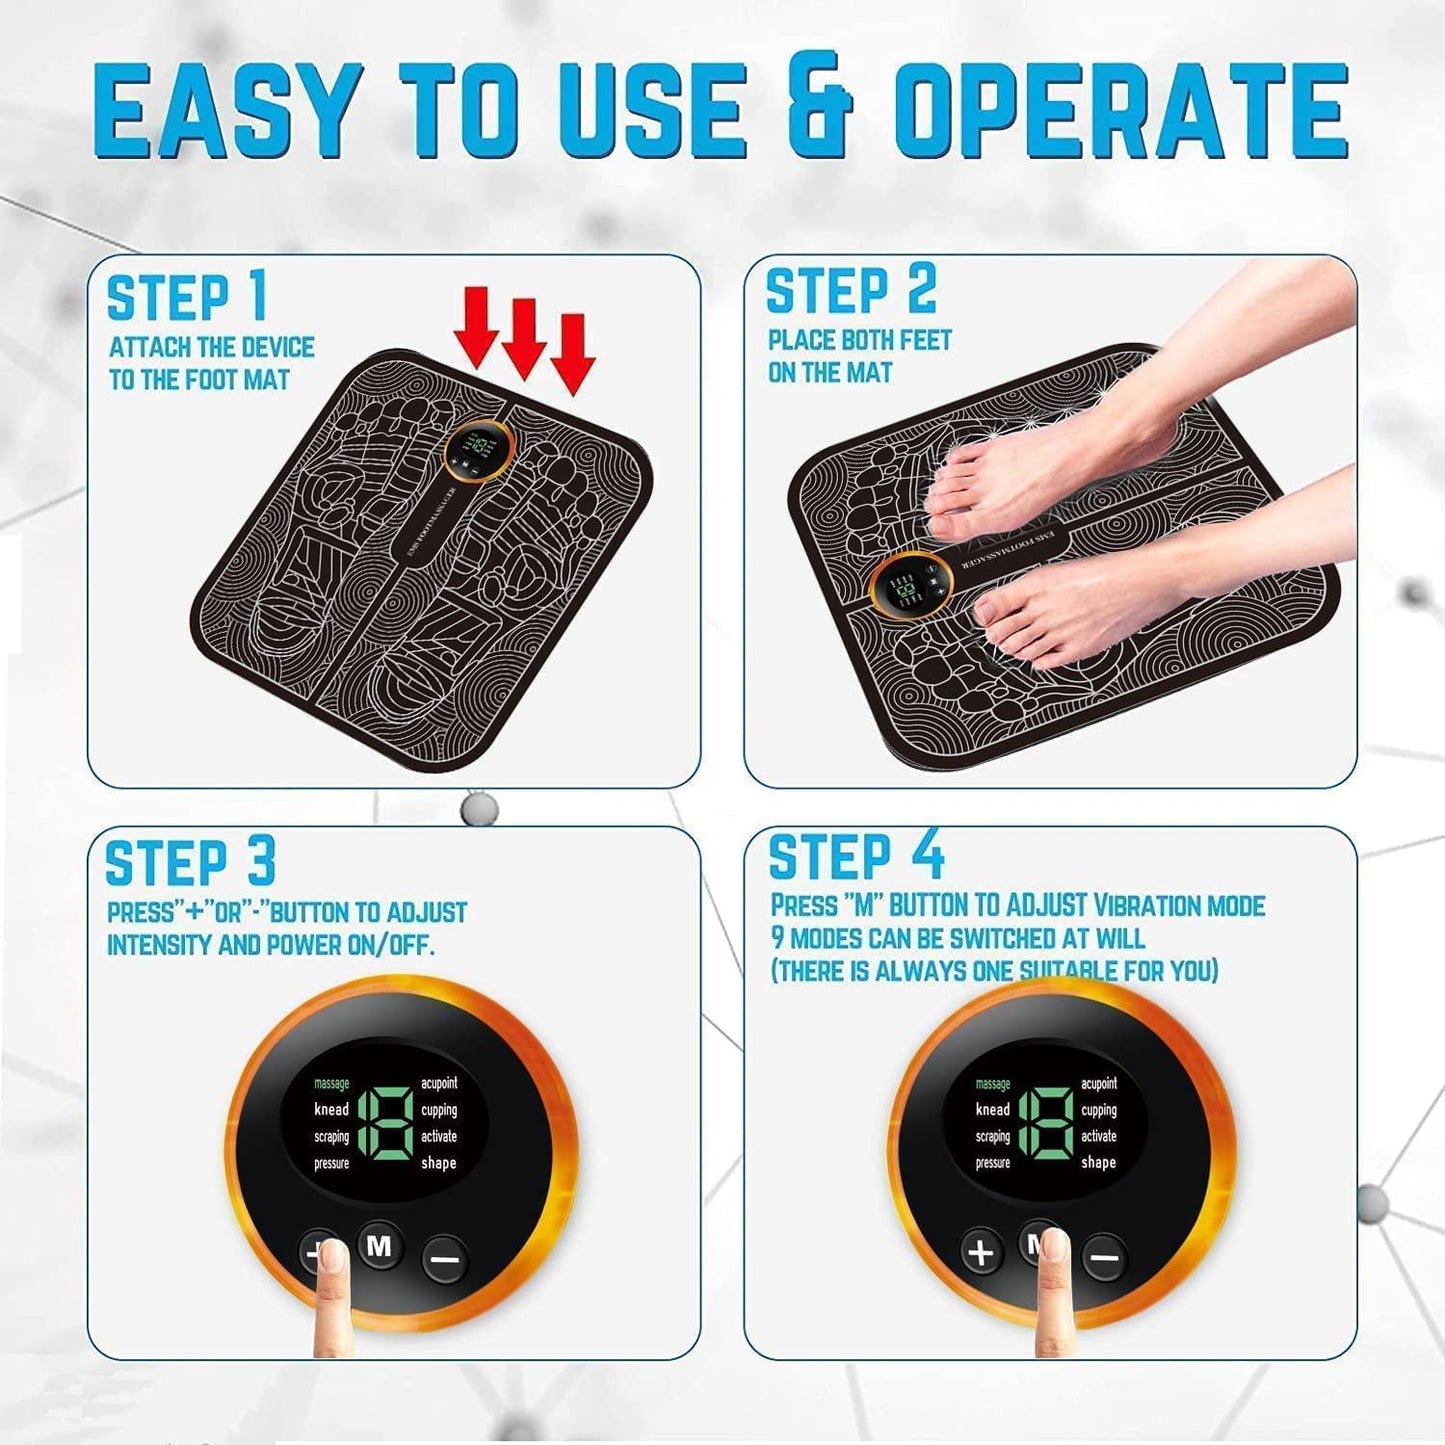 Instant Pain Relief Foot Massager - Fast and Effective